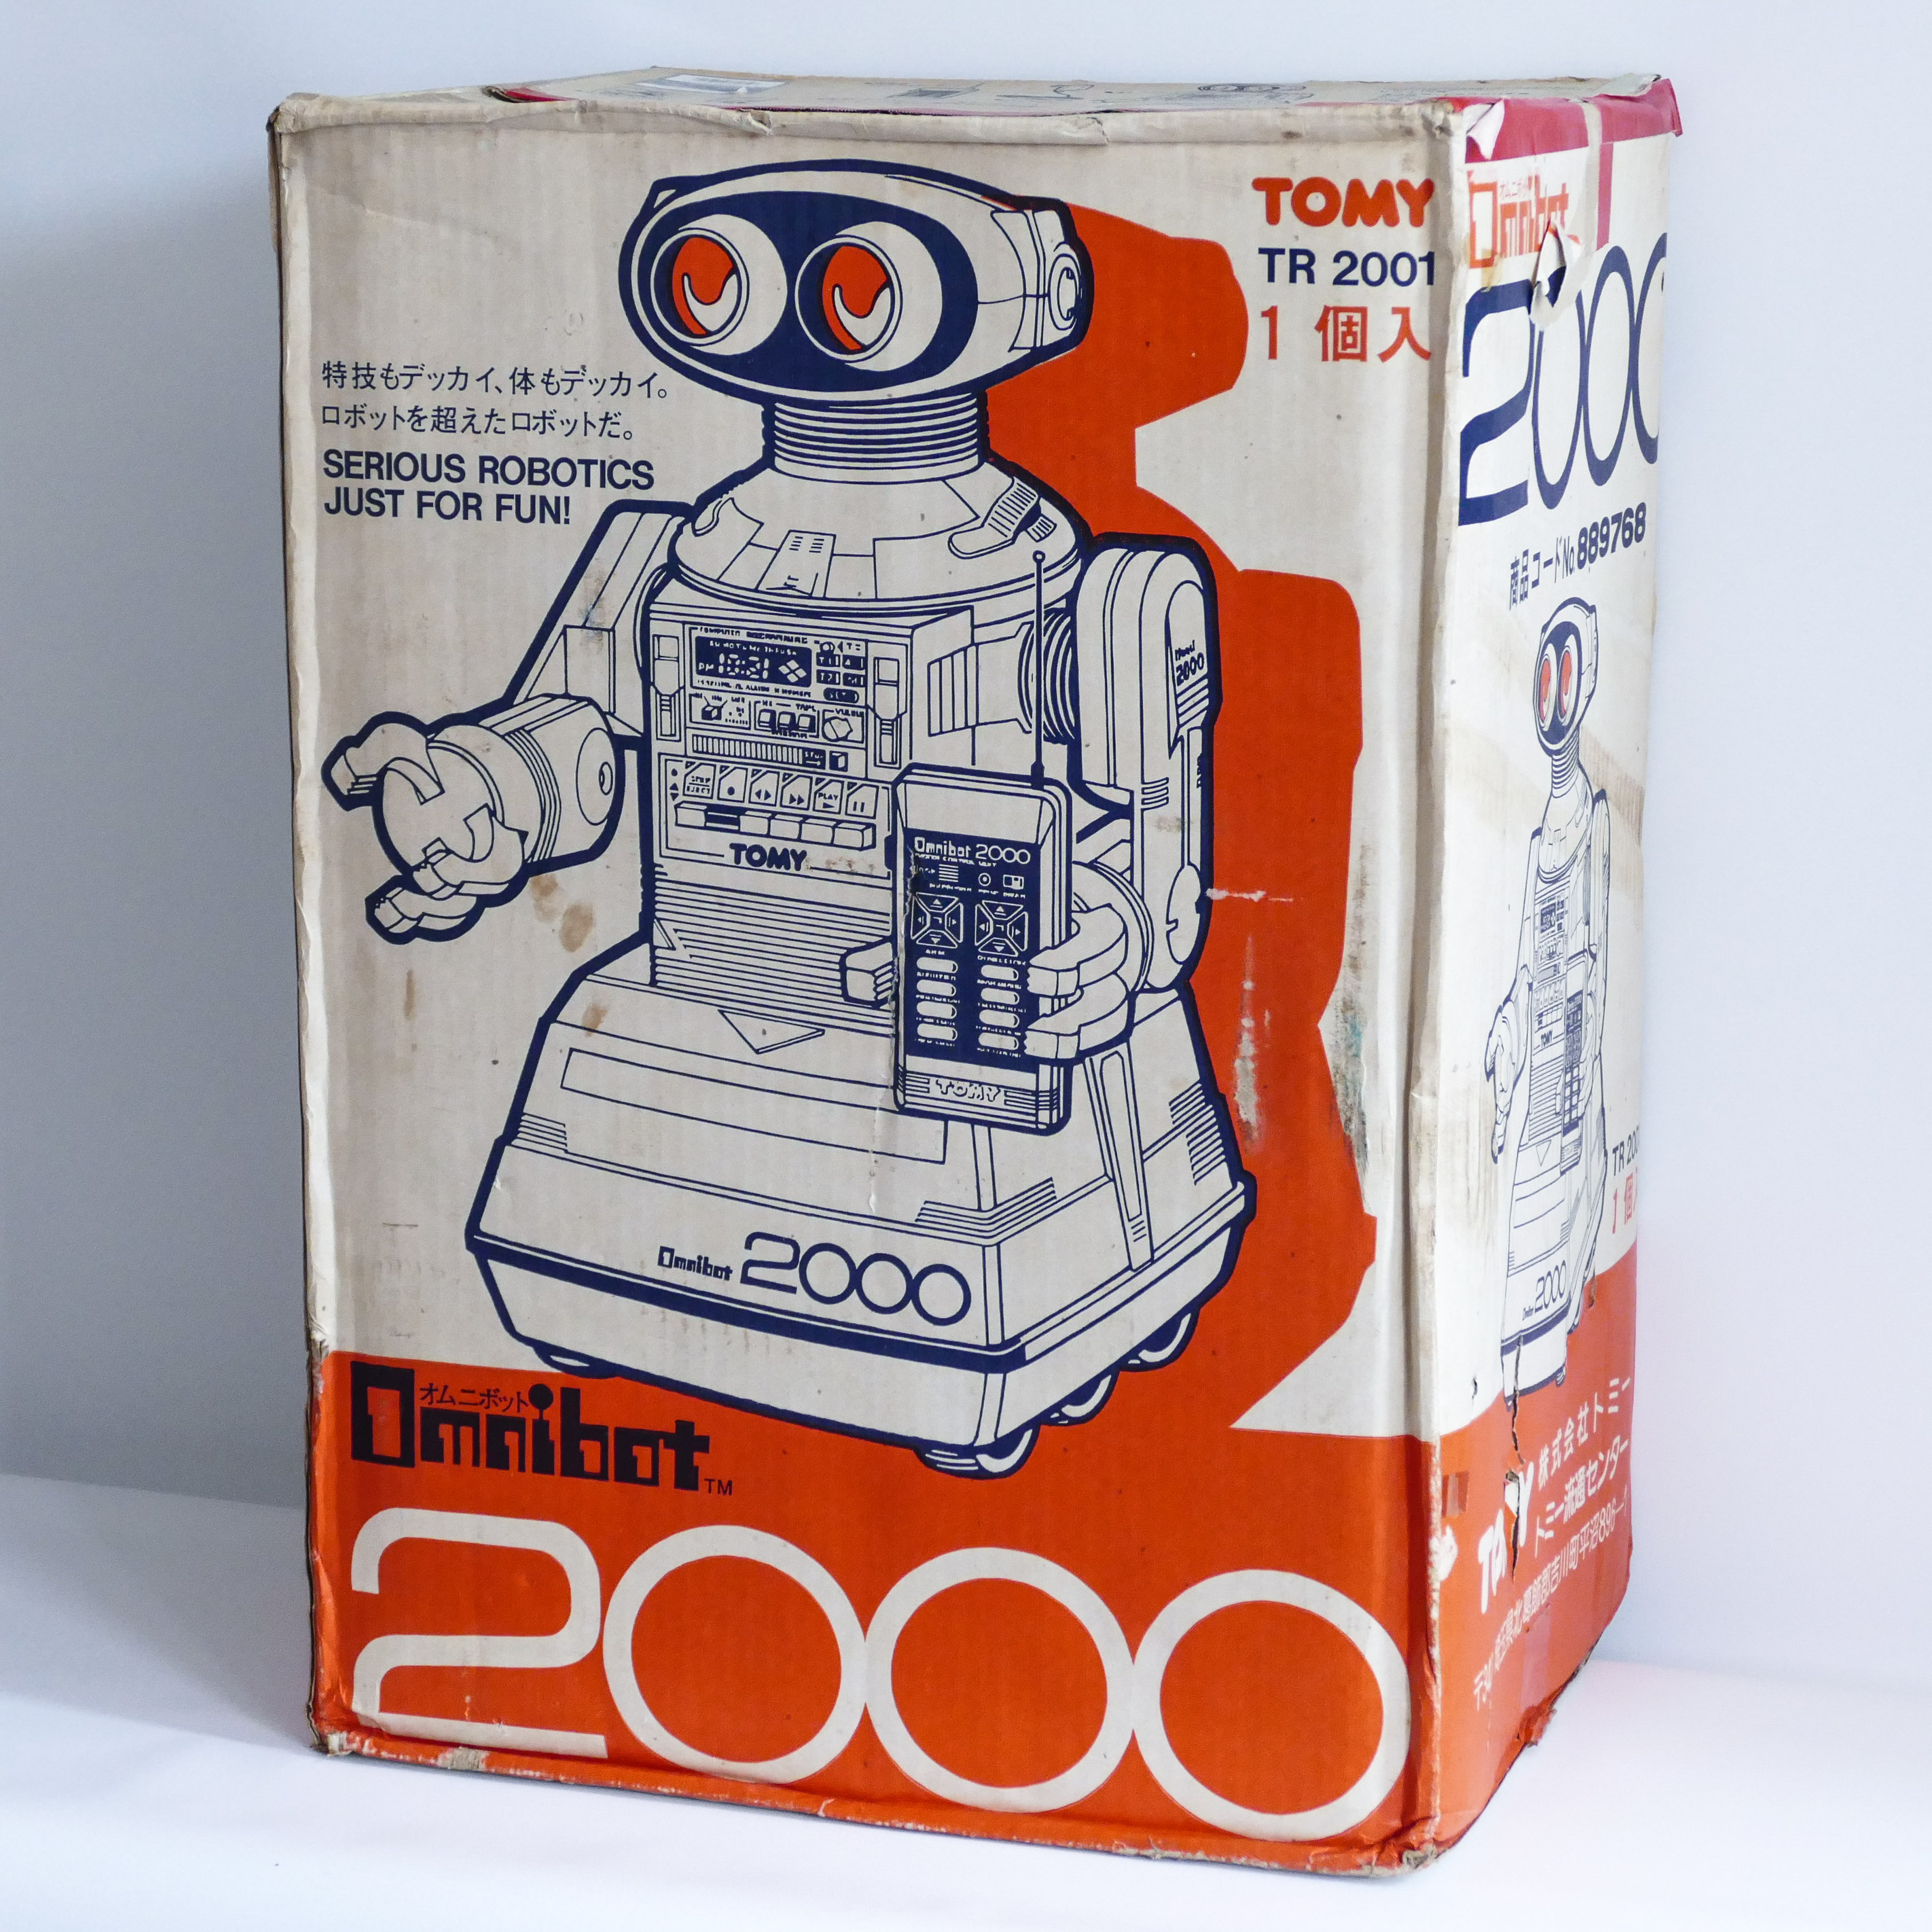 TOMY OMNIBOT 2000 VINTAGE PERSONAL HOME ROBOT JAPAN RETRO REMOTE CONTROL ELECTRONIC SPACE TOY